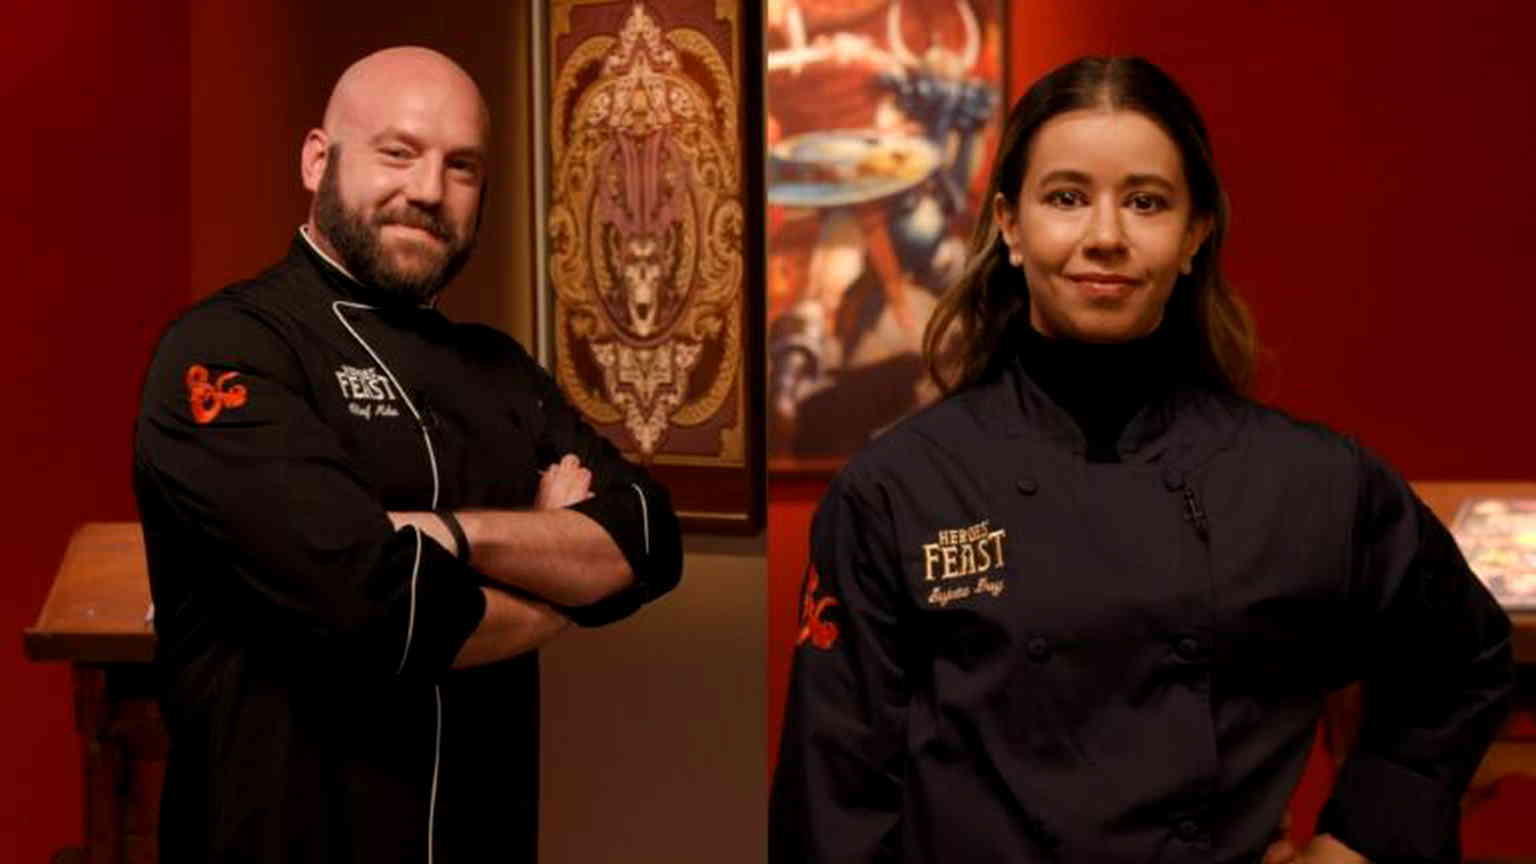 Sujata Day talks joining chef Mike Haracz for Dungeons & Dragons-themed cooking show